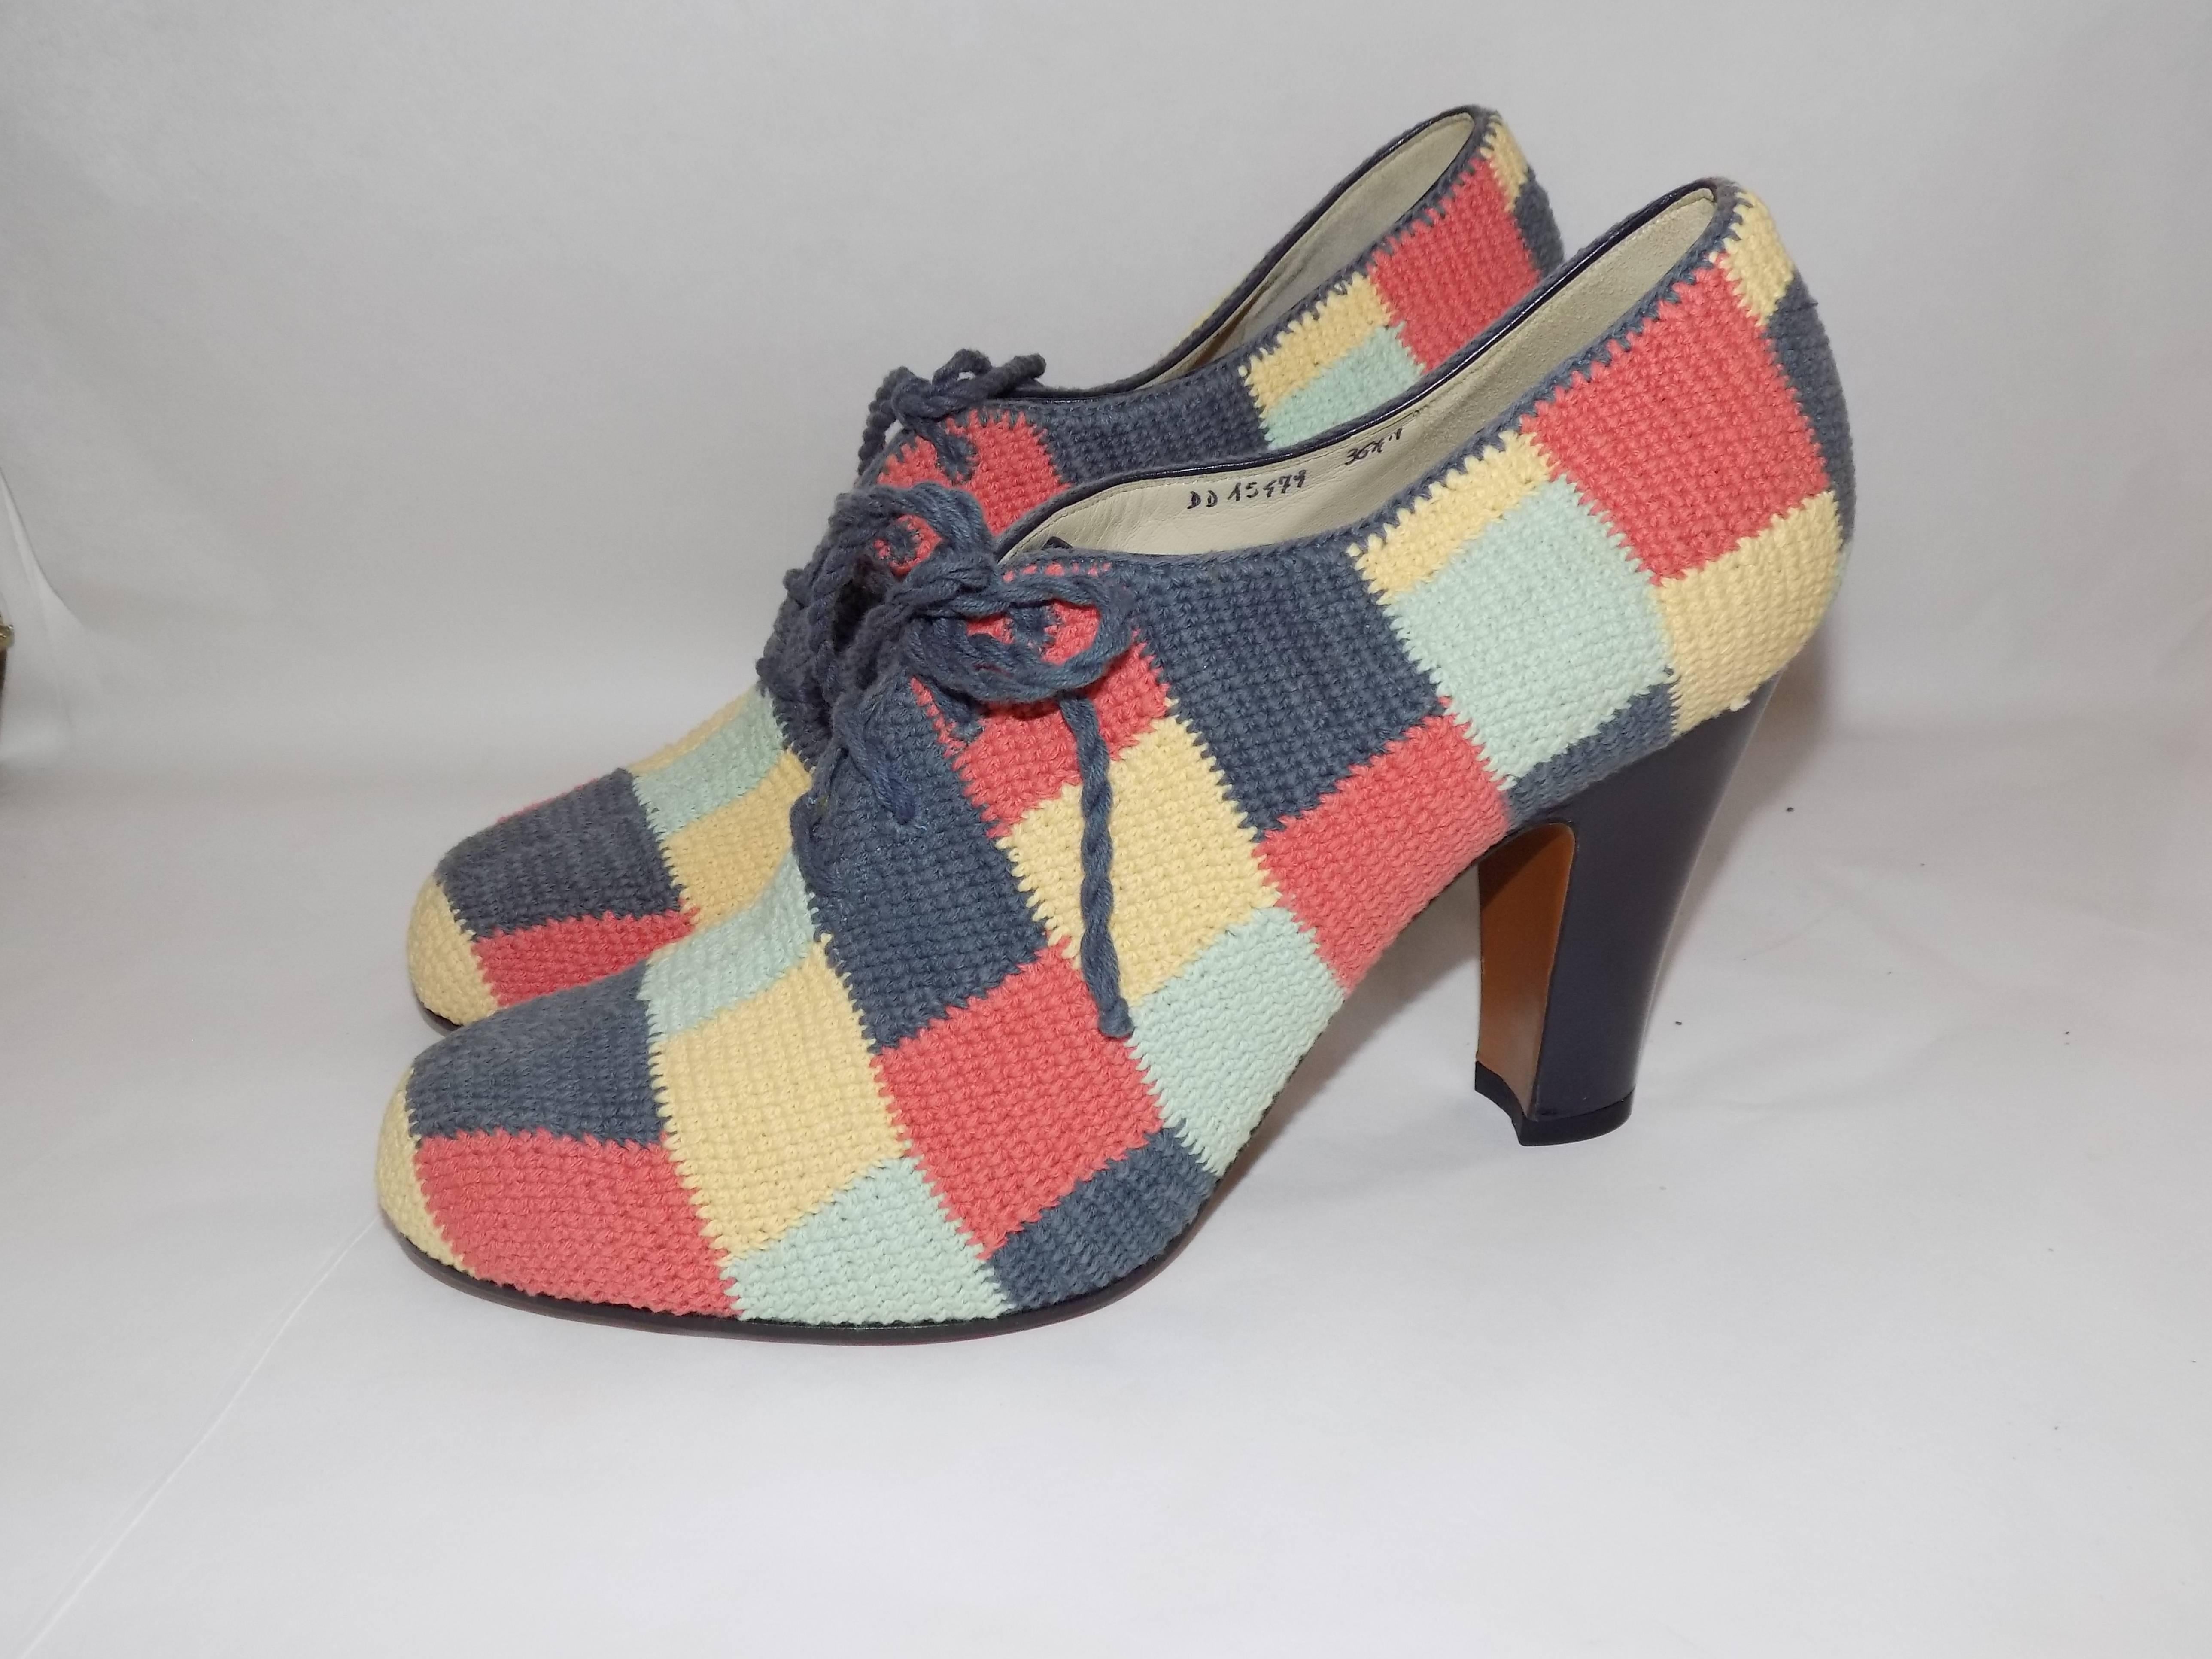 Truly  Iconic Salvatore Ferragamo limited  Museum edition Hand  crochet  oxford shoes. Patchwork motif  over leather . with navy leather covered  heel  and trim. . New in Box. Numbered 23 of 150 size 6 1/2. Luxurion gold sleeper bags and box. Hand